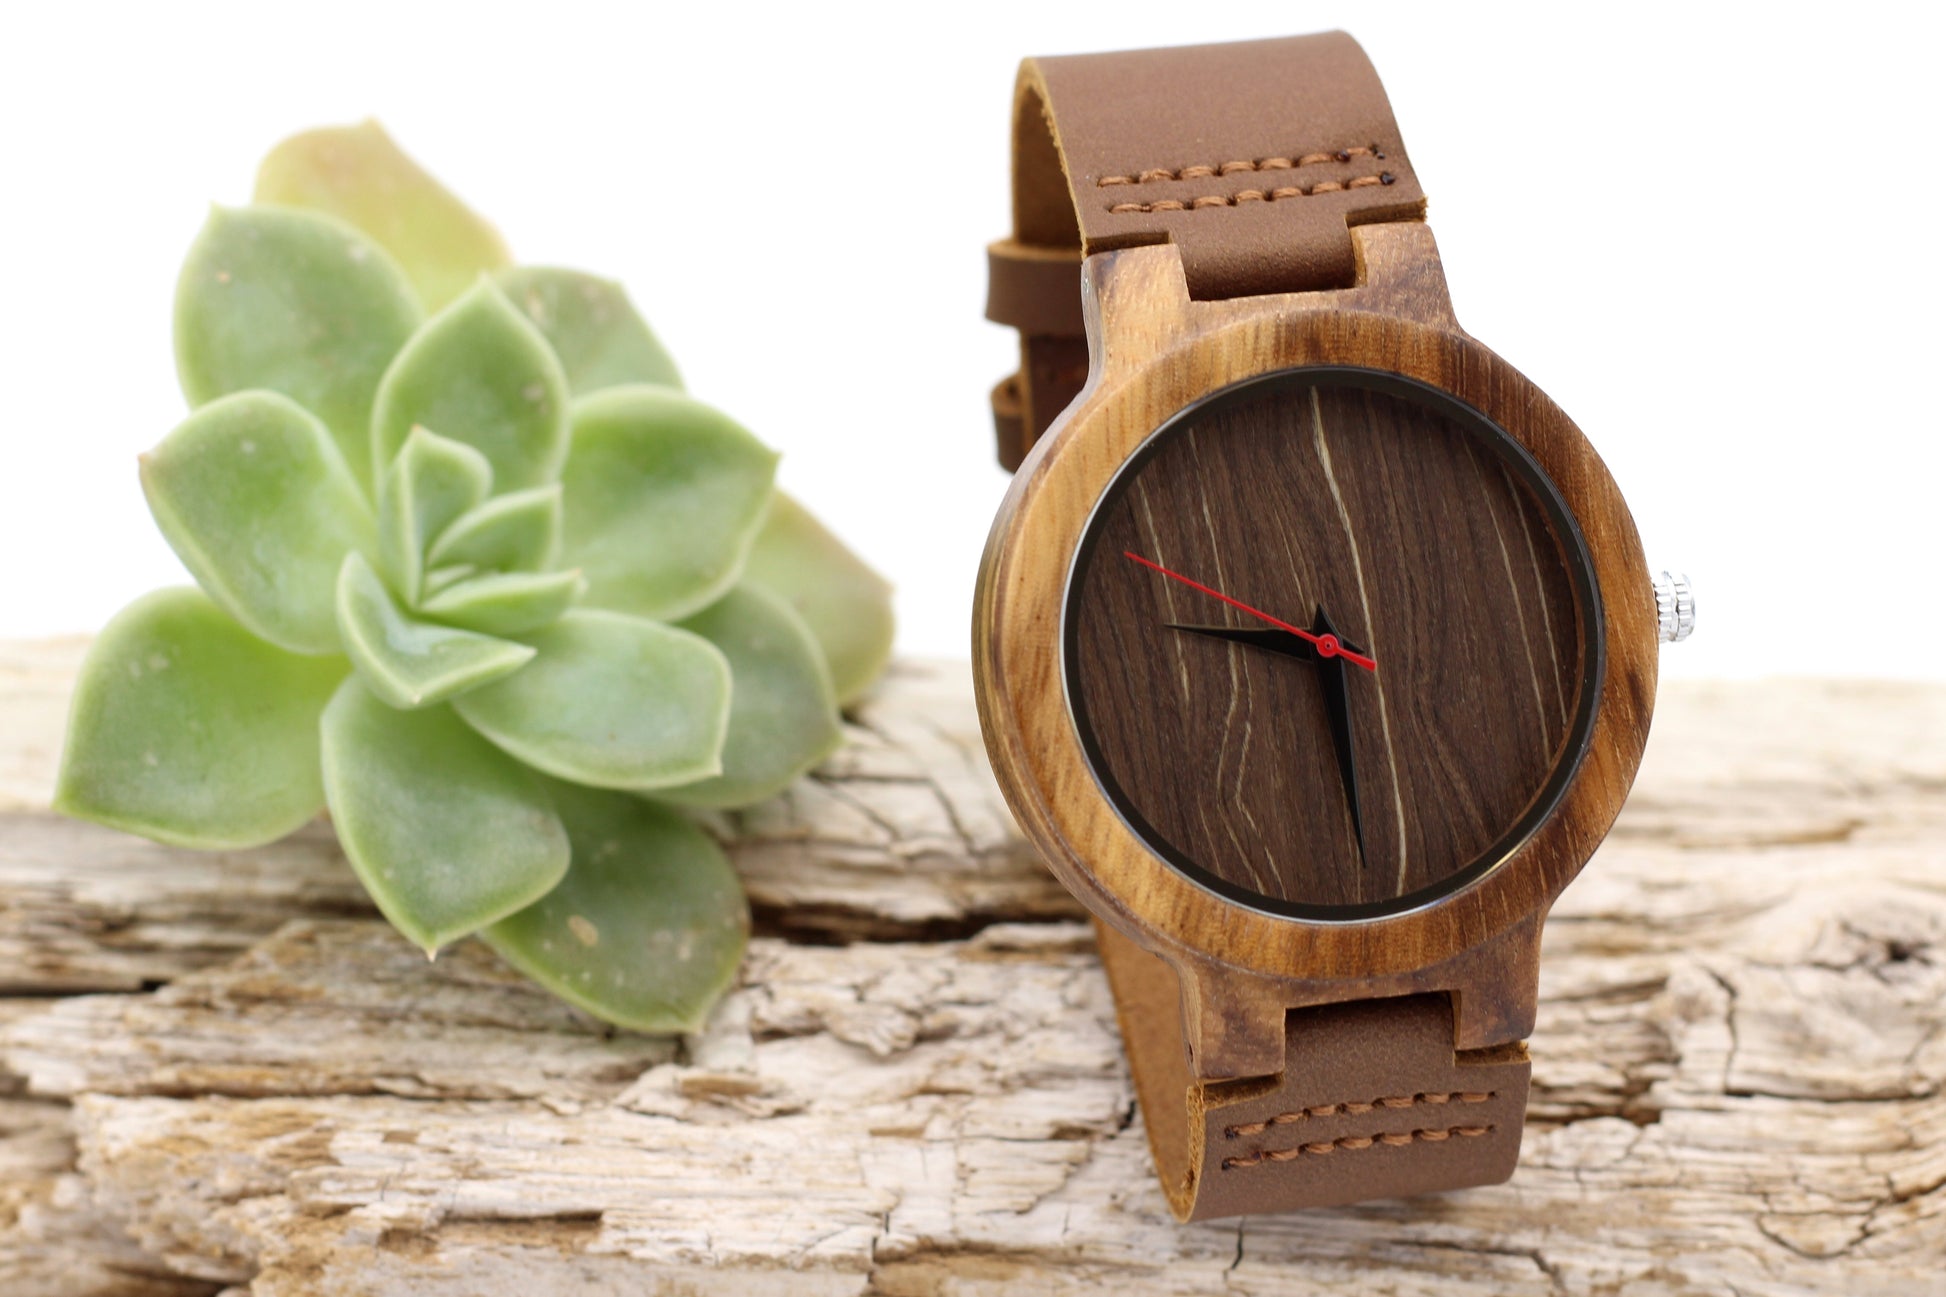 Manly Tawny mens wooden watch in very natural tones. Add engraving on the back for R100. Striking red second hand for a touch of colour.